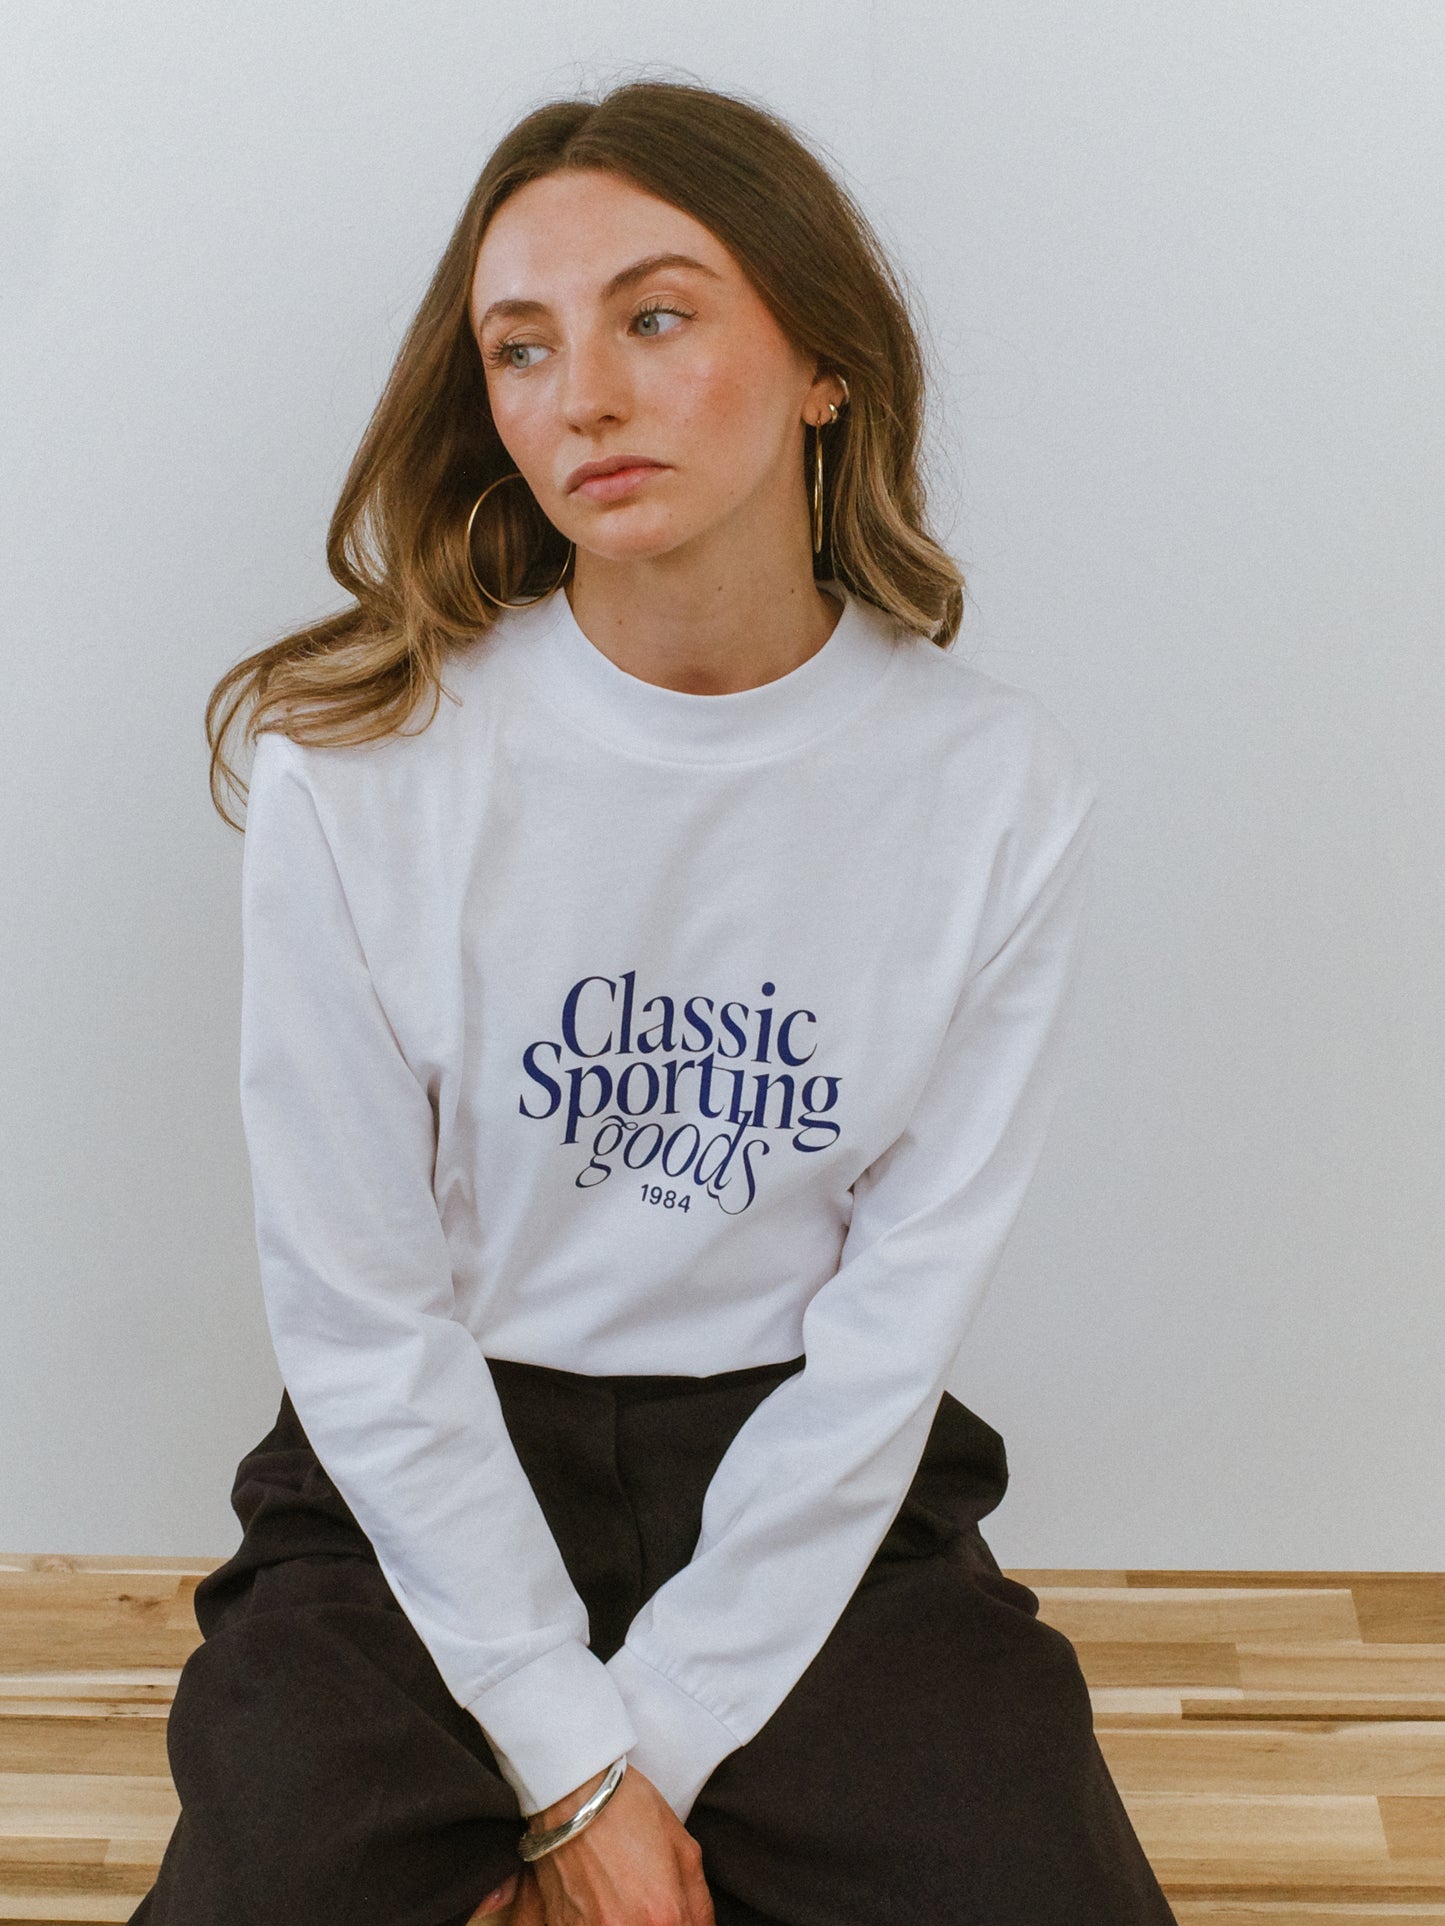 Vice 84 WMNS 'Sporting Goods' Longsleeve Tee - White